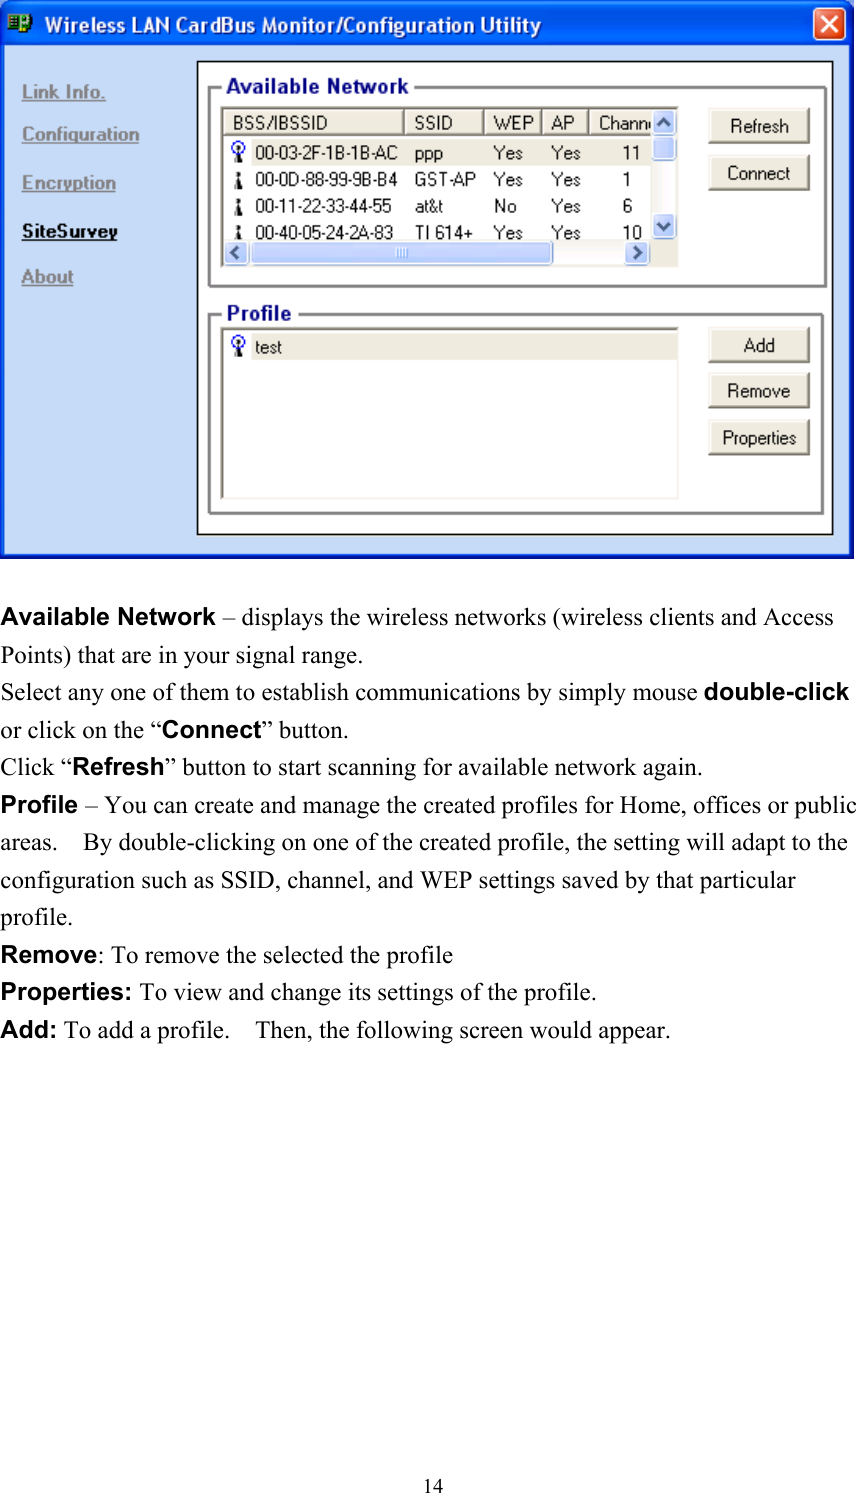   Available Network – displays the wireless networks (wireless clients and Access Points) that are in your signal range.   Select any one of them to establish communications by simply mouse double-click or click on the “Connect” button. Click “Refresh” button to start scanning for available network again. Profile – You can create and manage the created profiles for Home, offices or public areas.    By double-clicking on one of the created profile, the setting will adapt to the configuration such as SSID, channel, and WEP settings saved by that particular profile. Remove: To remove the selected the profile Properties: To view and change its settings of the profile. Add: To add a profile.    Then, the following screen would appear.  14